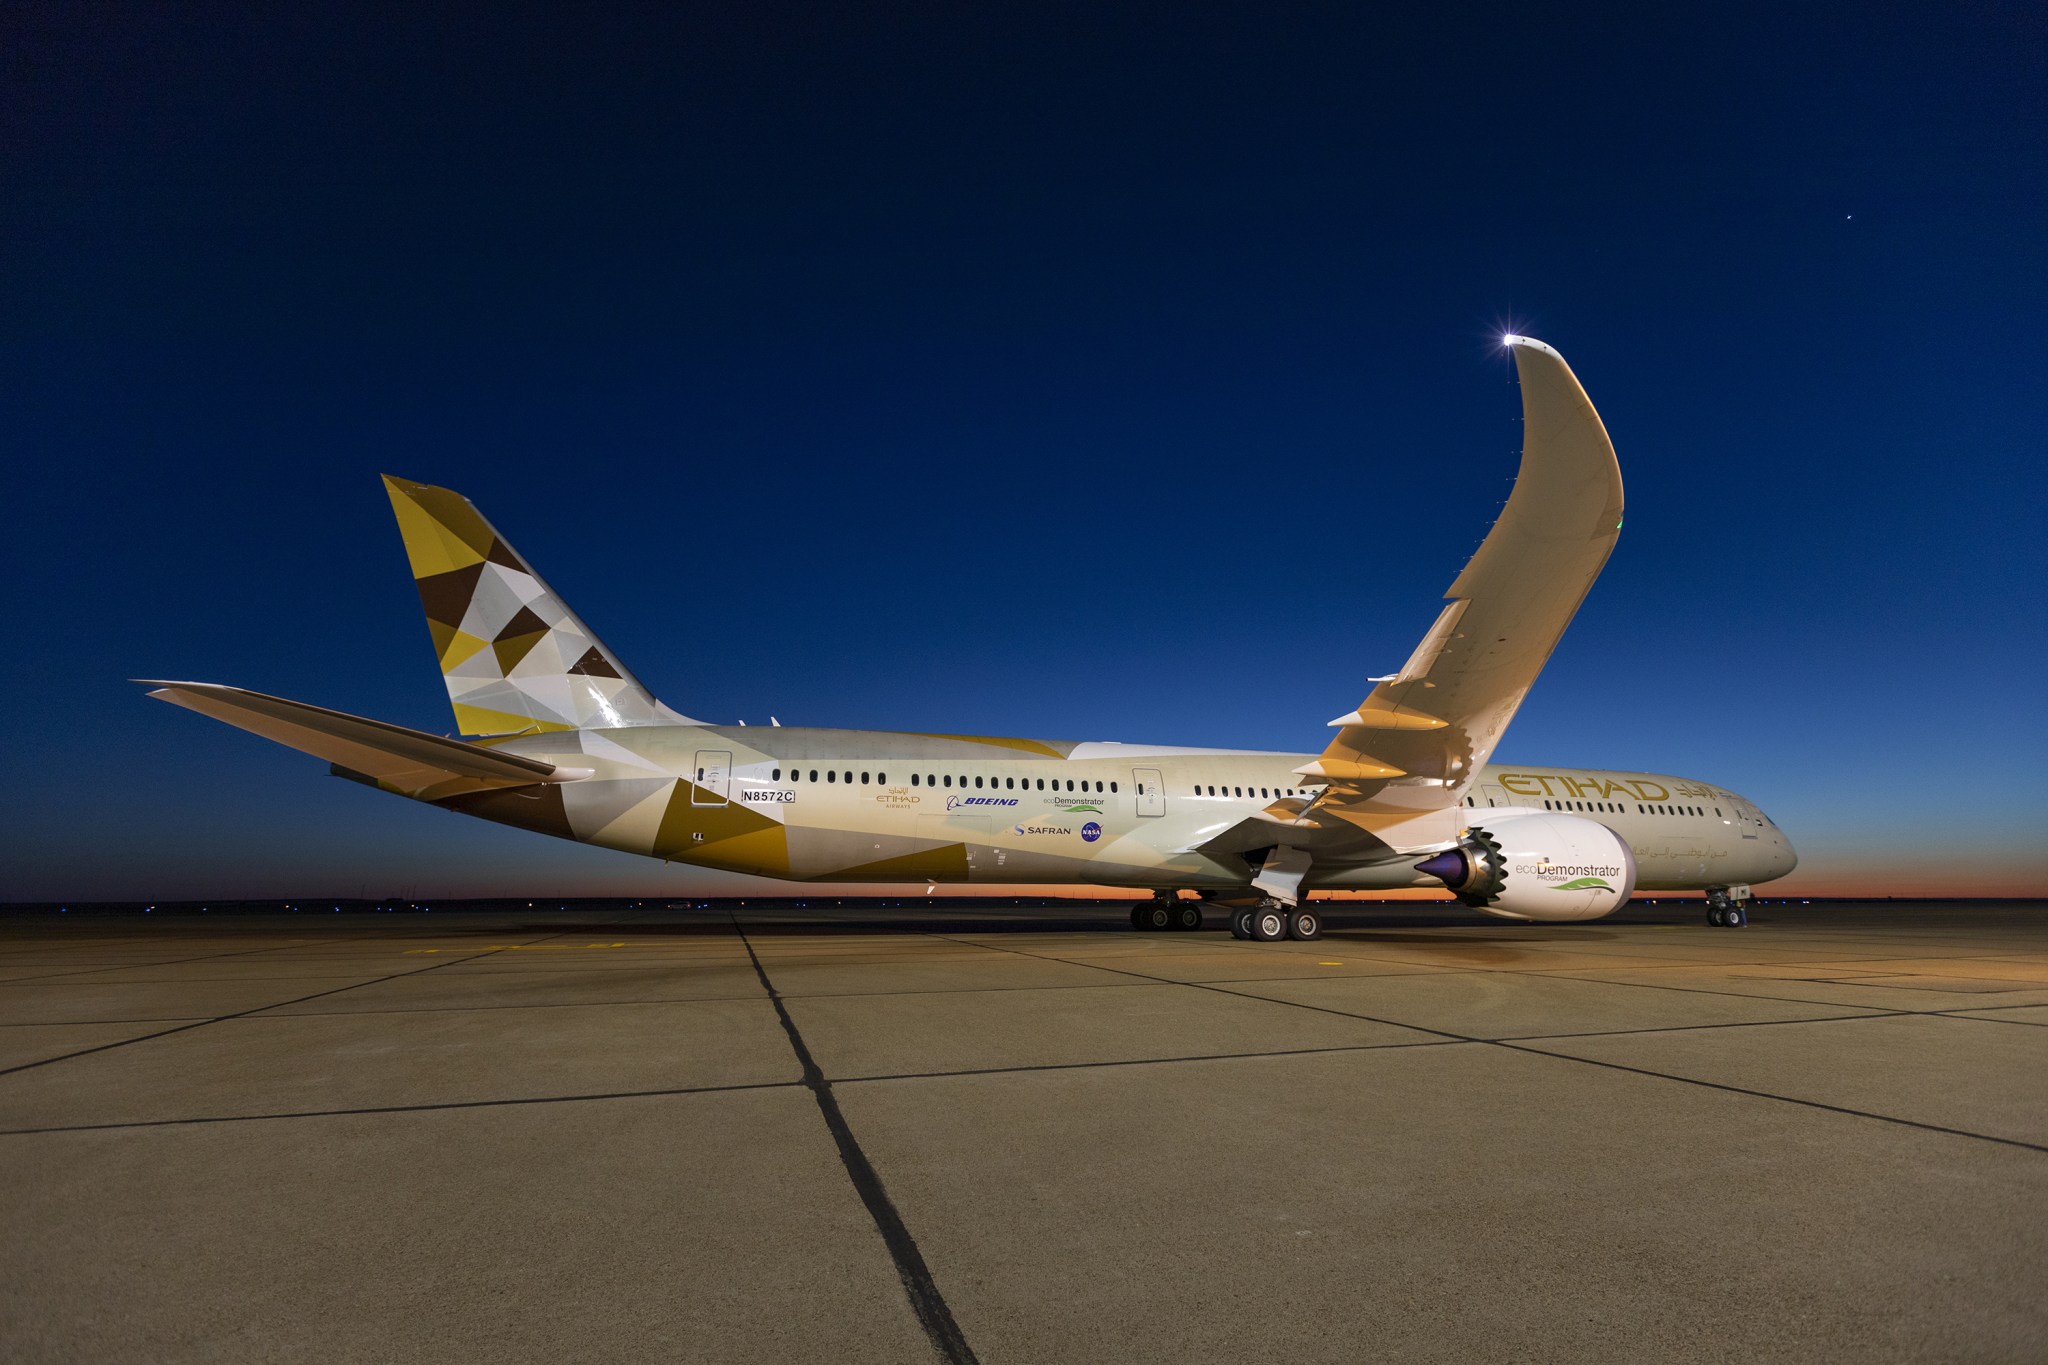 The 787-10 Dreamliner parked on the tarmac at sunset.